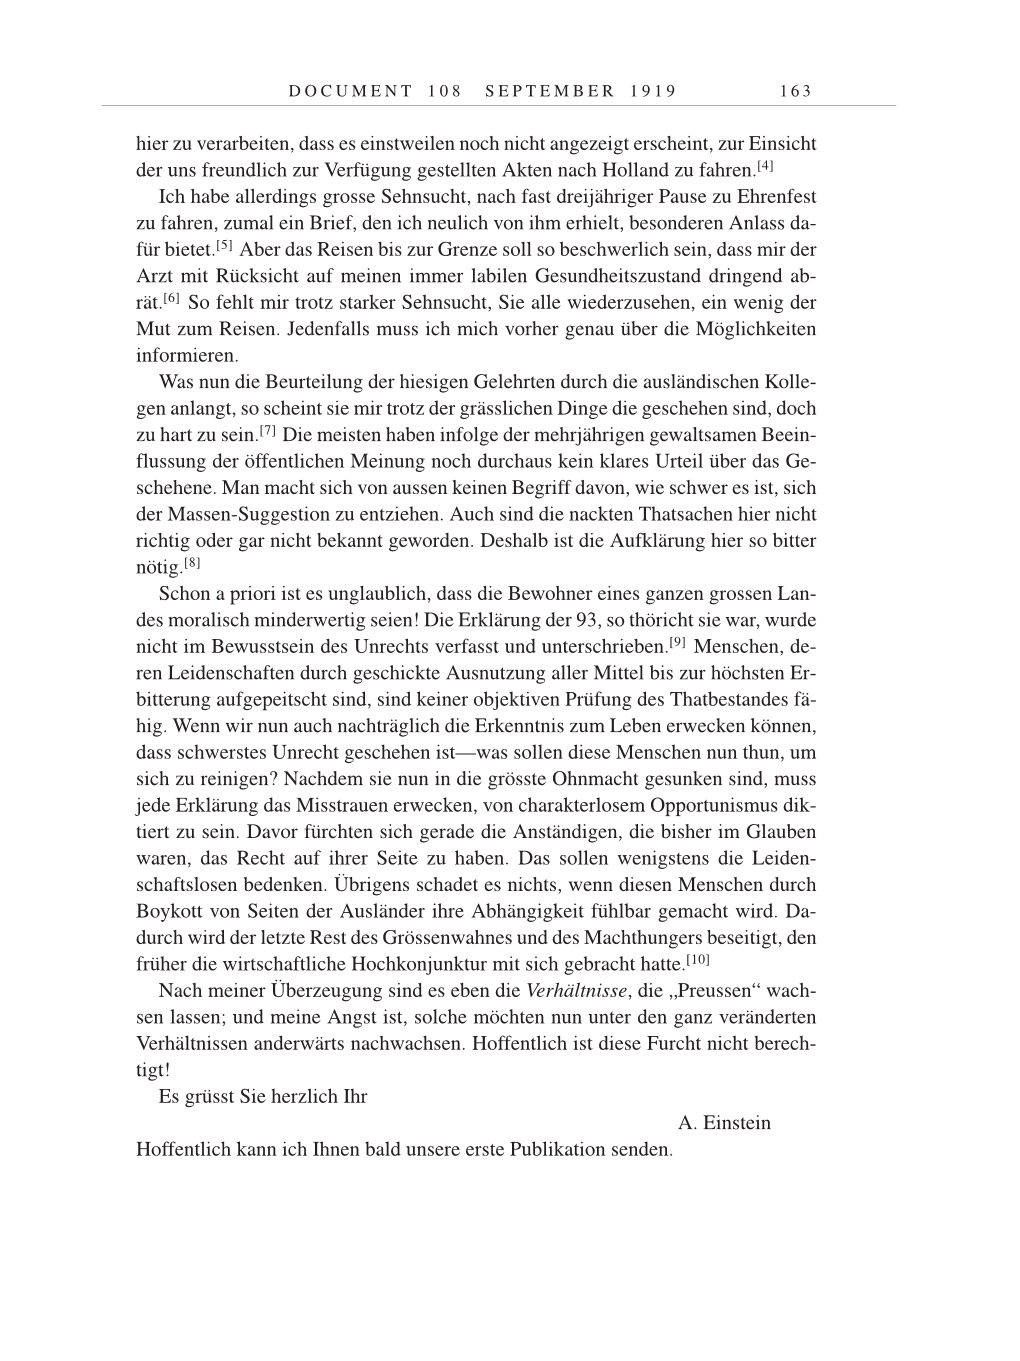 Volume 9: The Berlin Years: Correspondence January 1919-April 1920 page 163